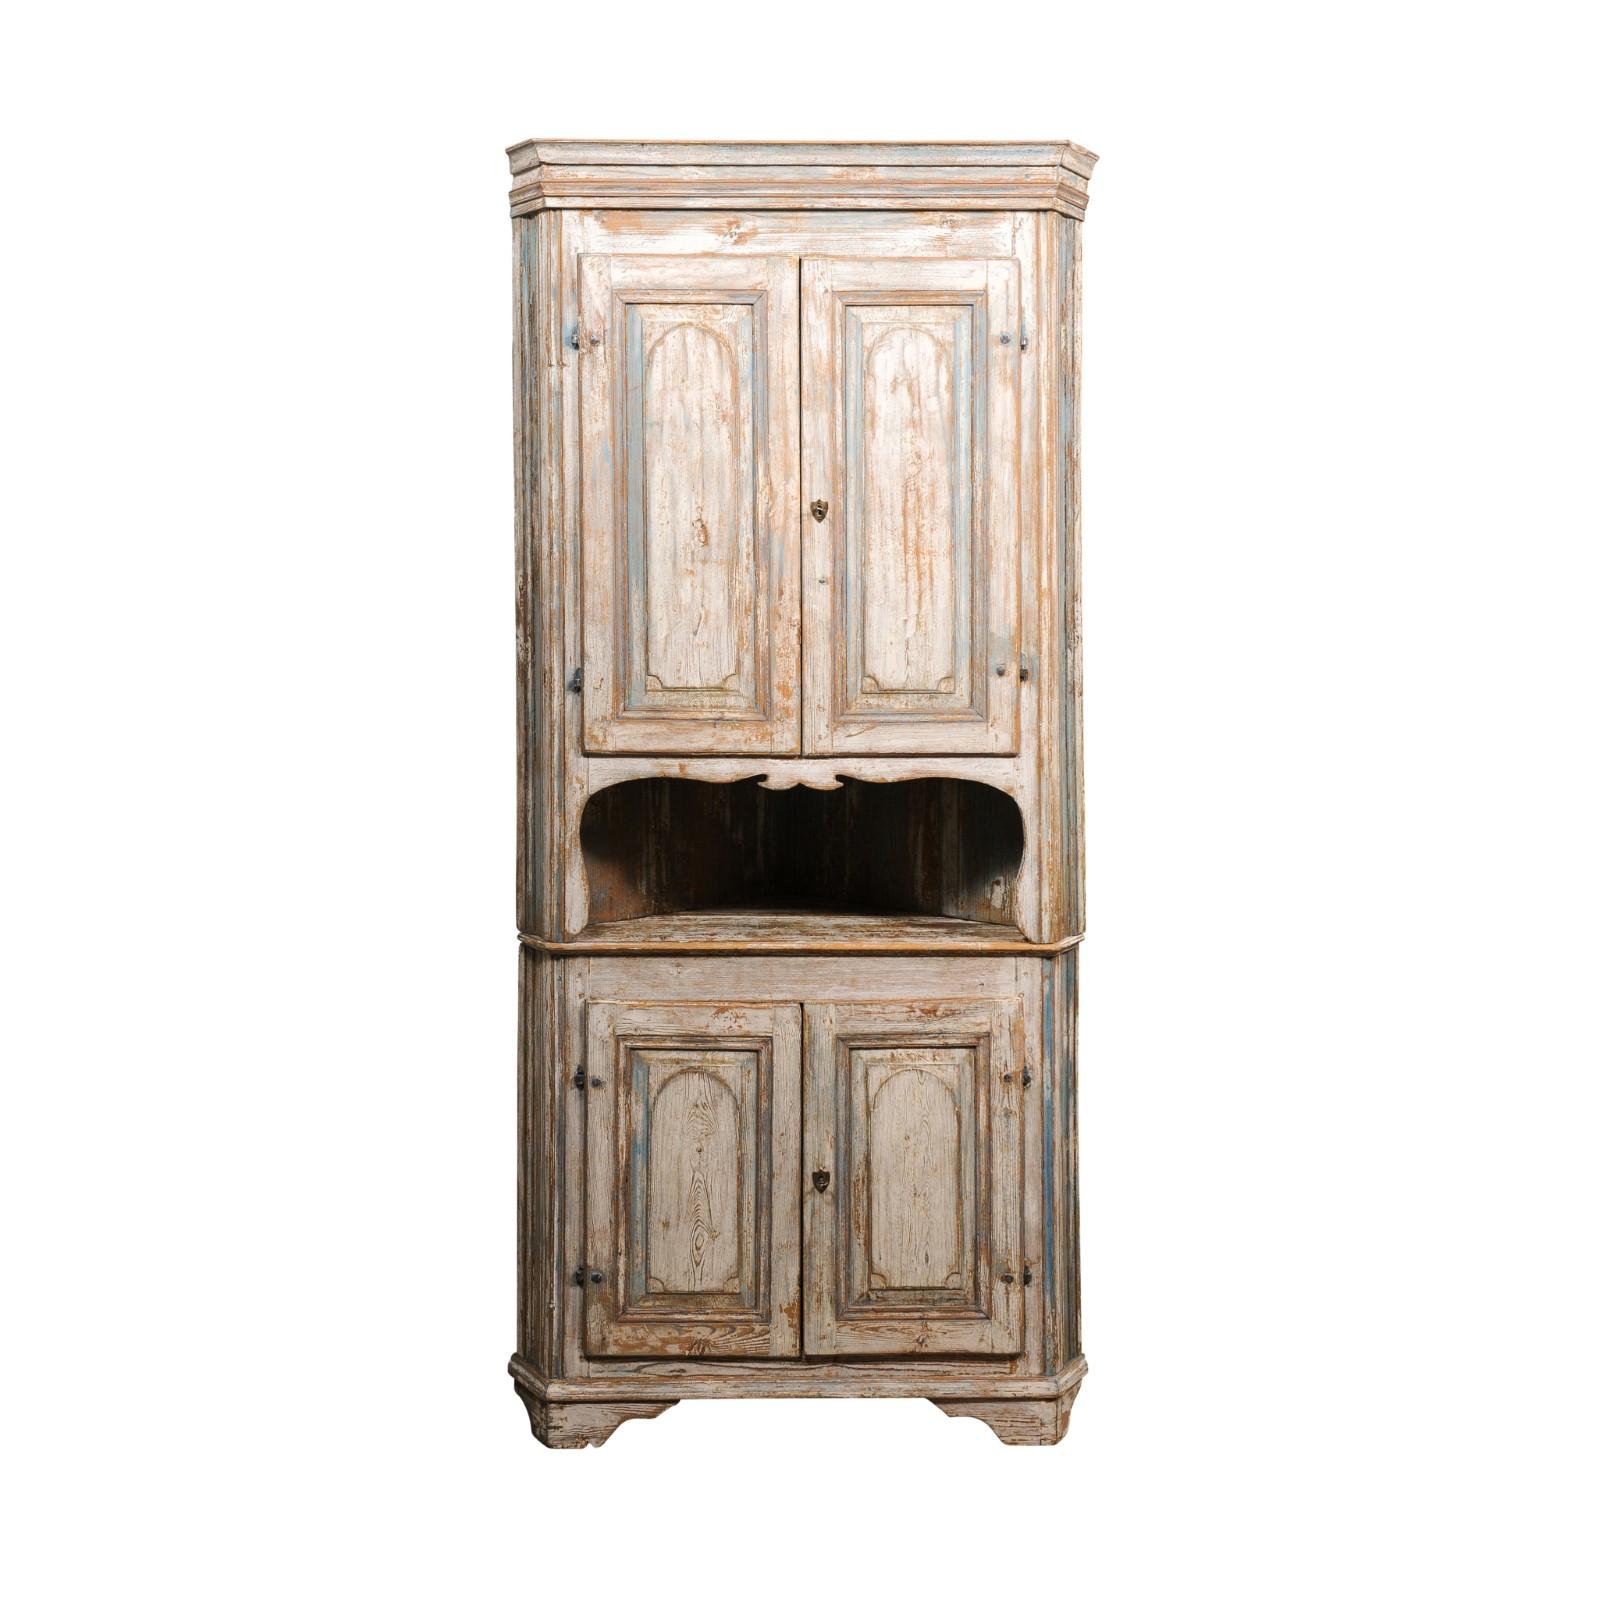 Swedish Gustavian Period 1800s Corner Cabinet with Carved Doors and Open Shelf For Sale 5